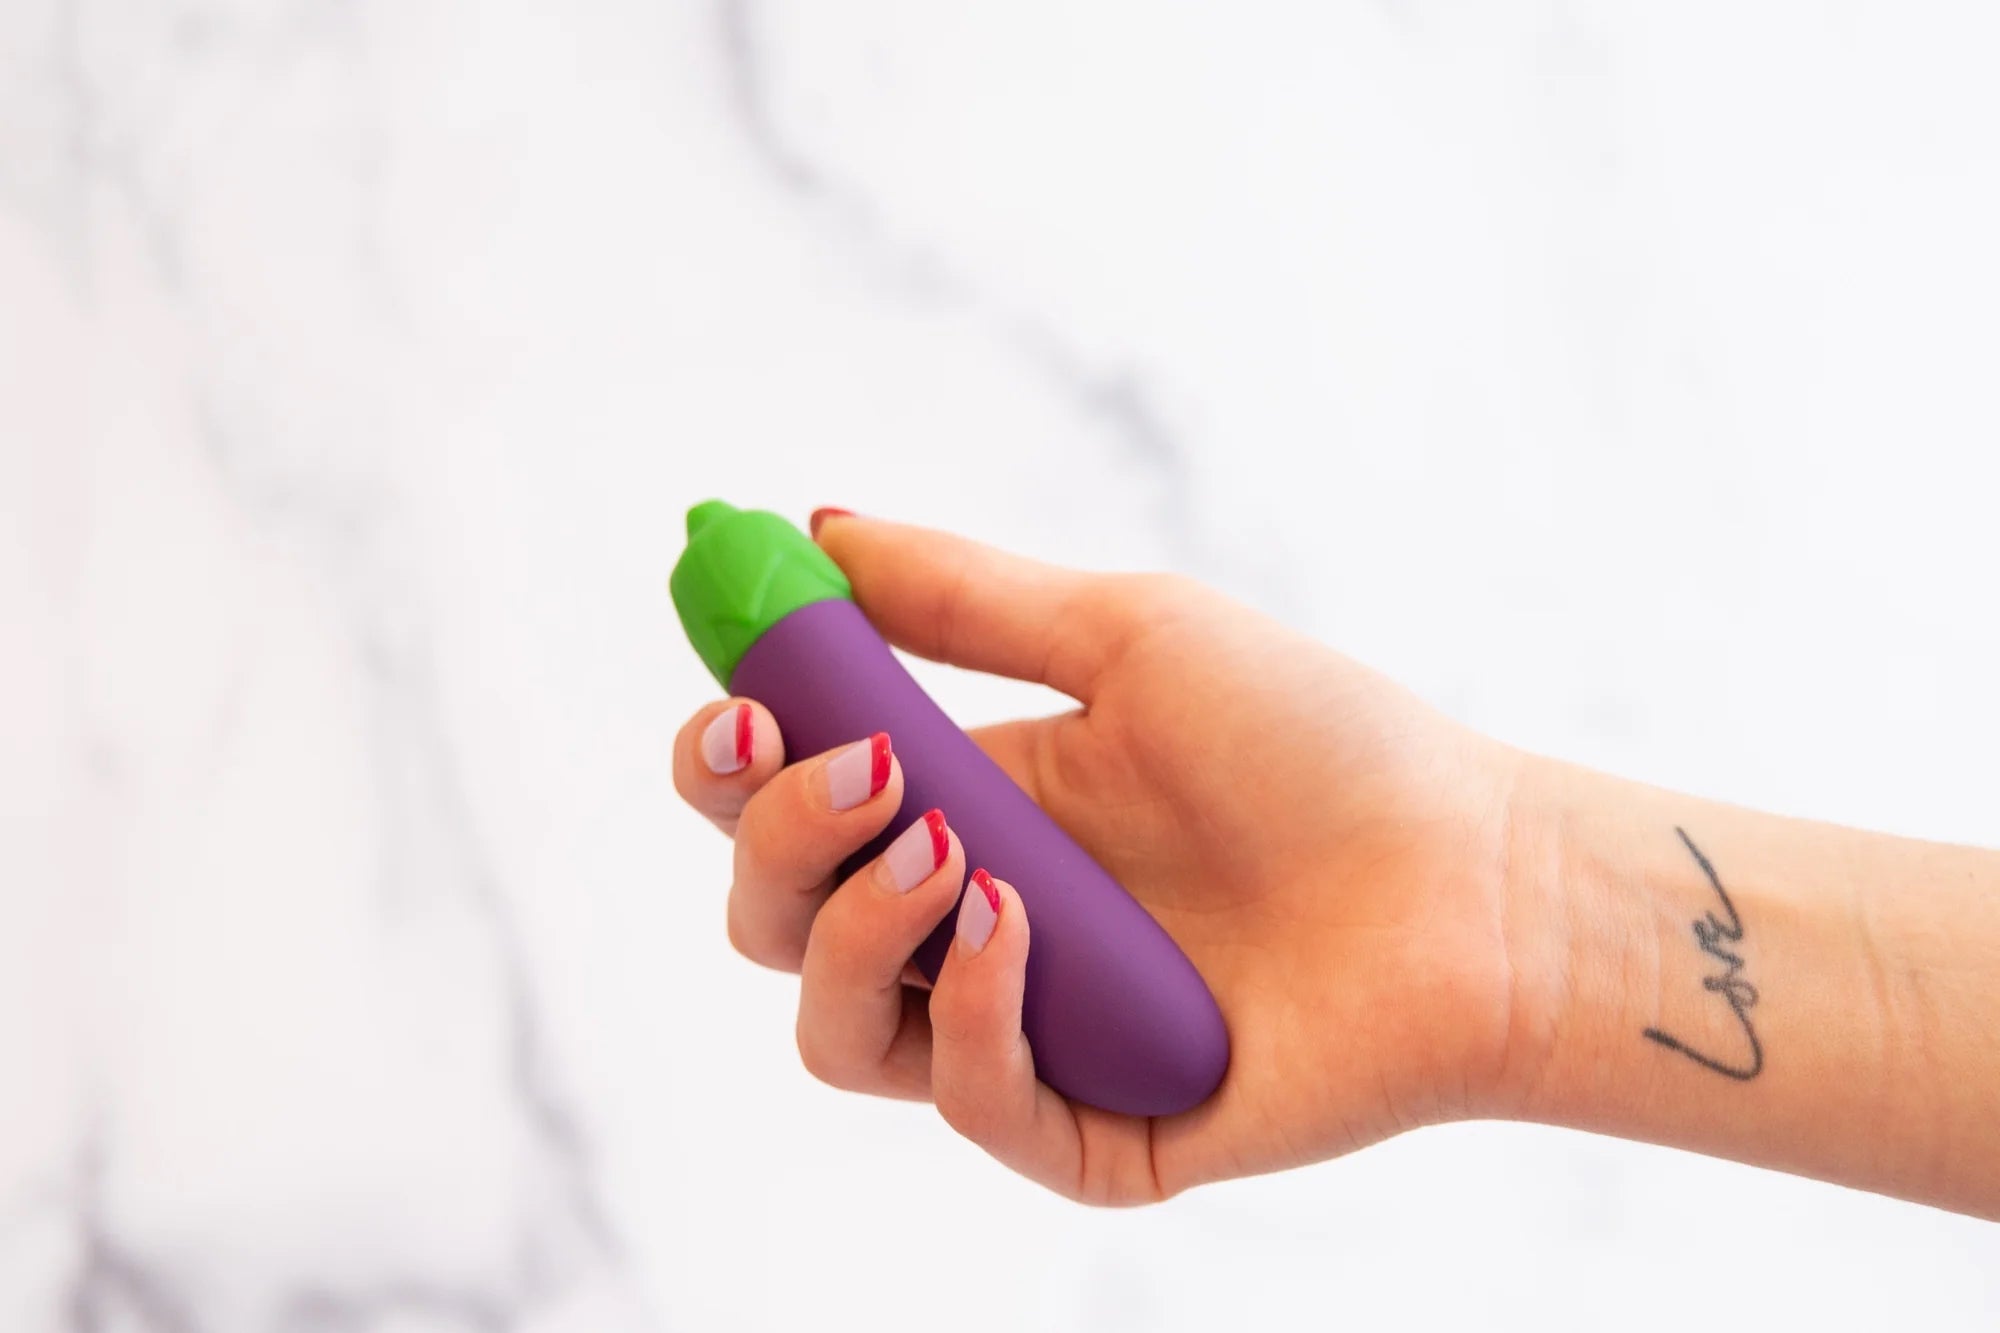 A person holds a small eggplant vibrator